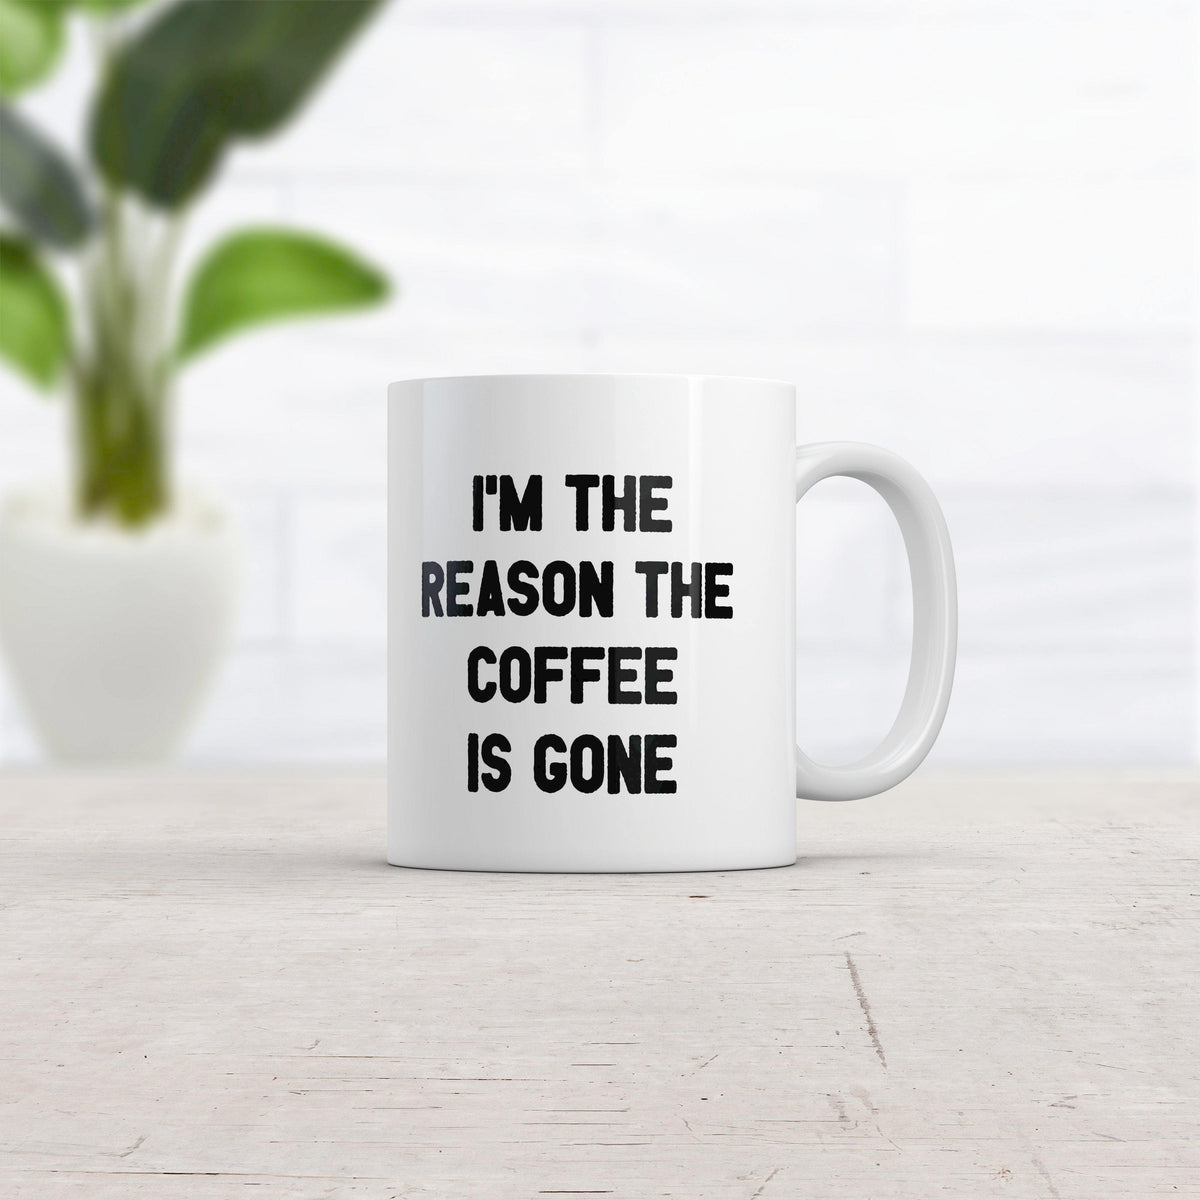 Im The Reason The Coffee Is Gone Mug Funny Caffeine Lovers Text Graphic Novelty Coffee Cup-11oz  -  Crazy Dog T-Shirts